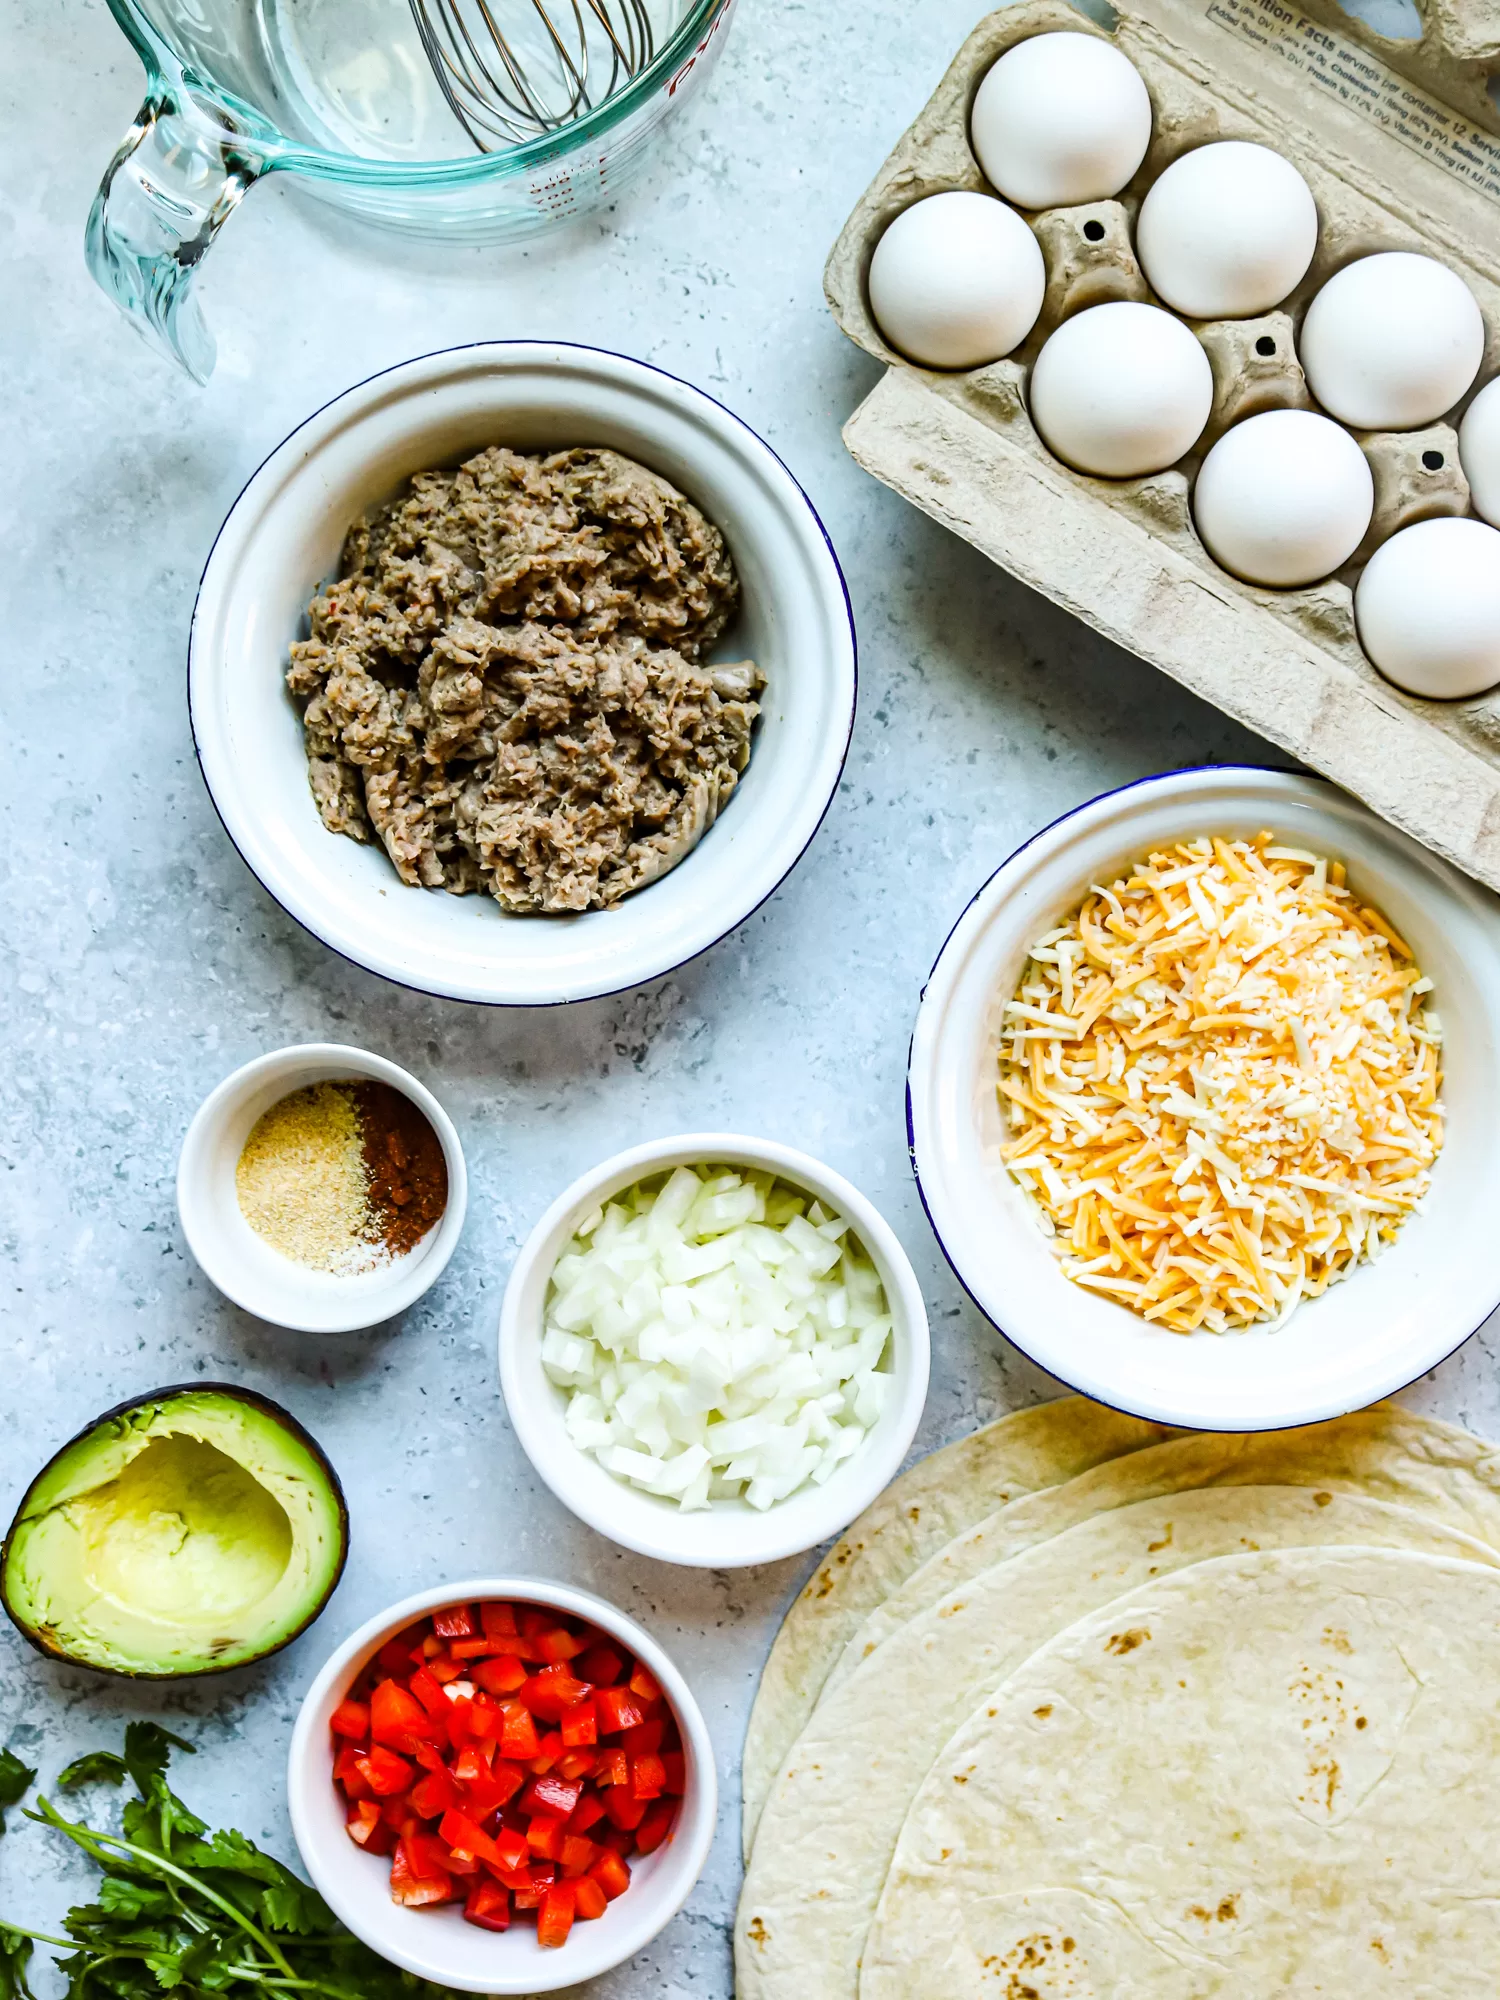 Ingredients for turkey sausage and egg breakfast quesadillas